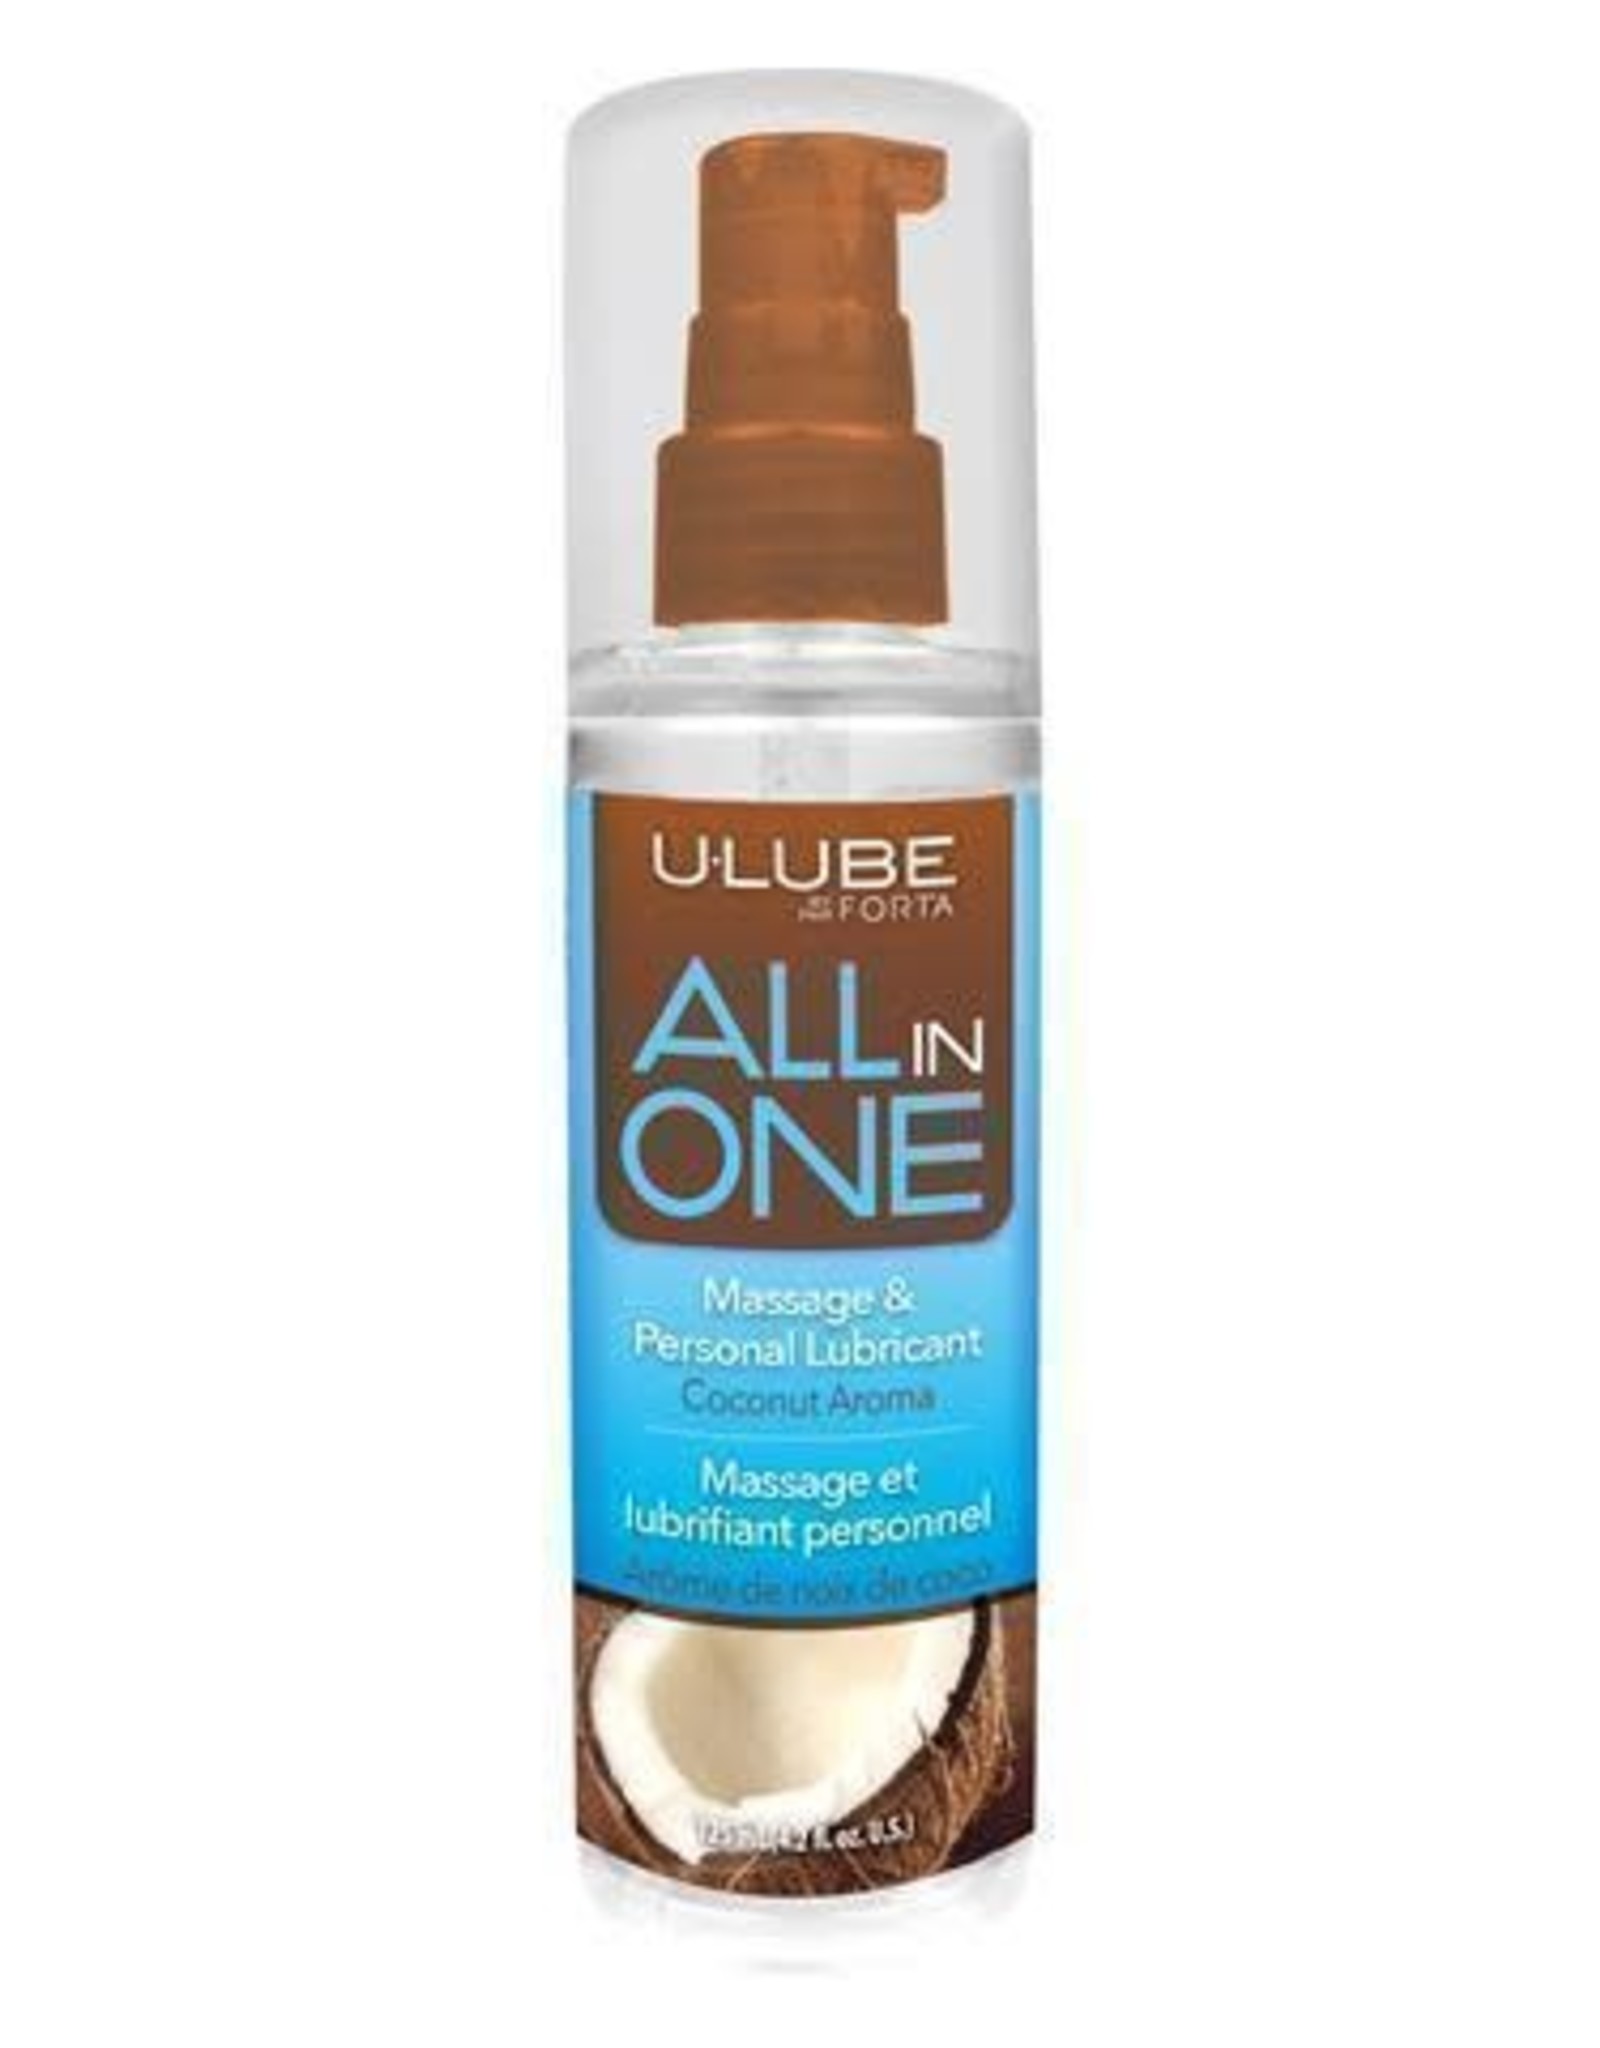 All in One Massage/Lubricant - Coconut - 4.2 oz